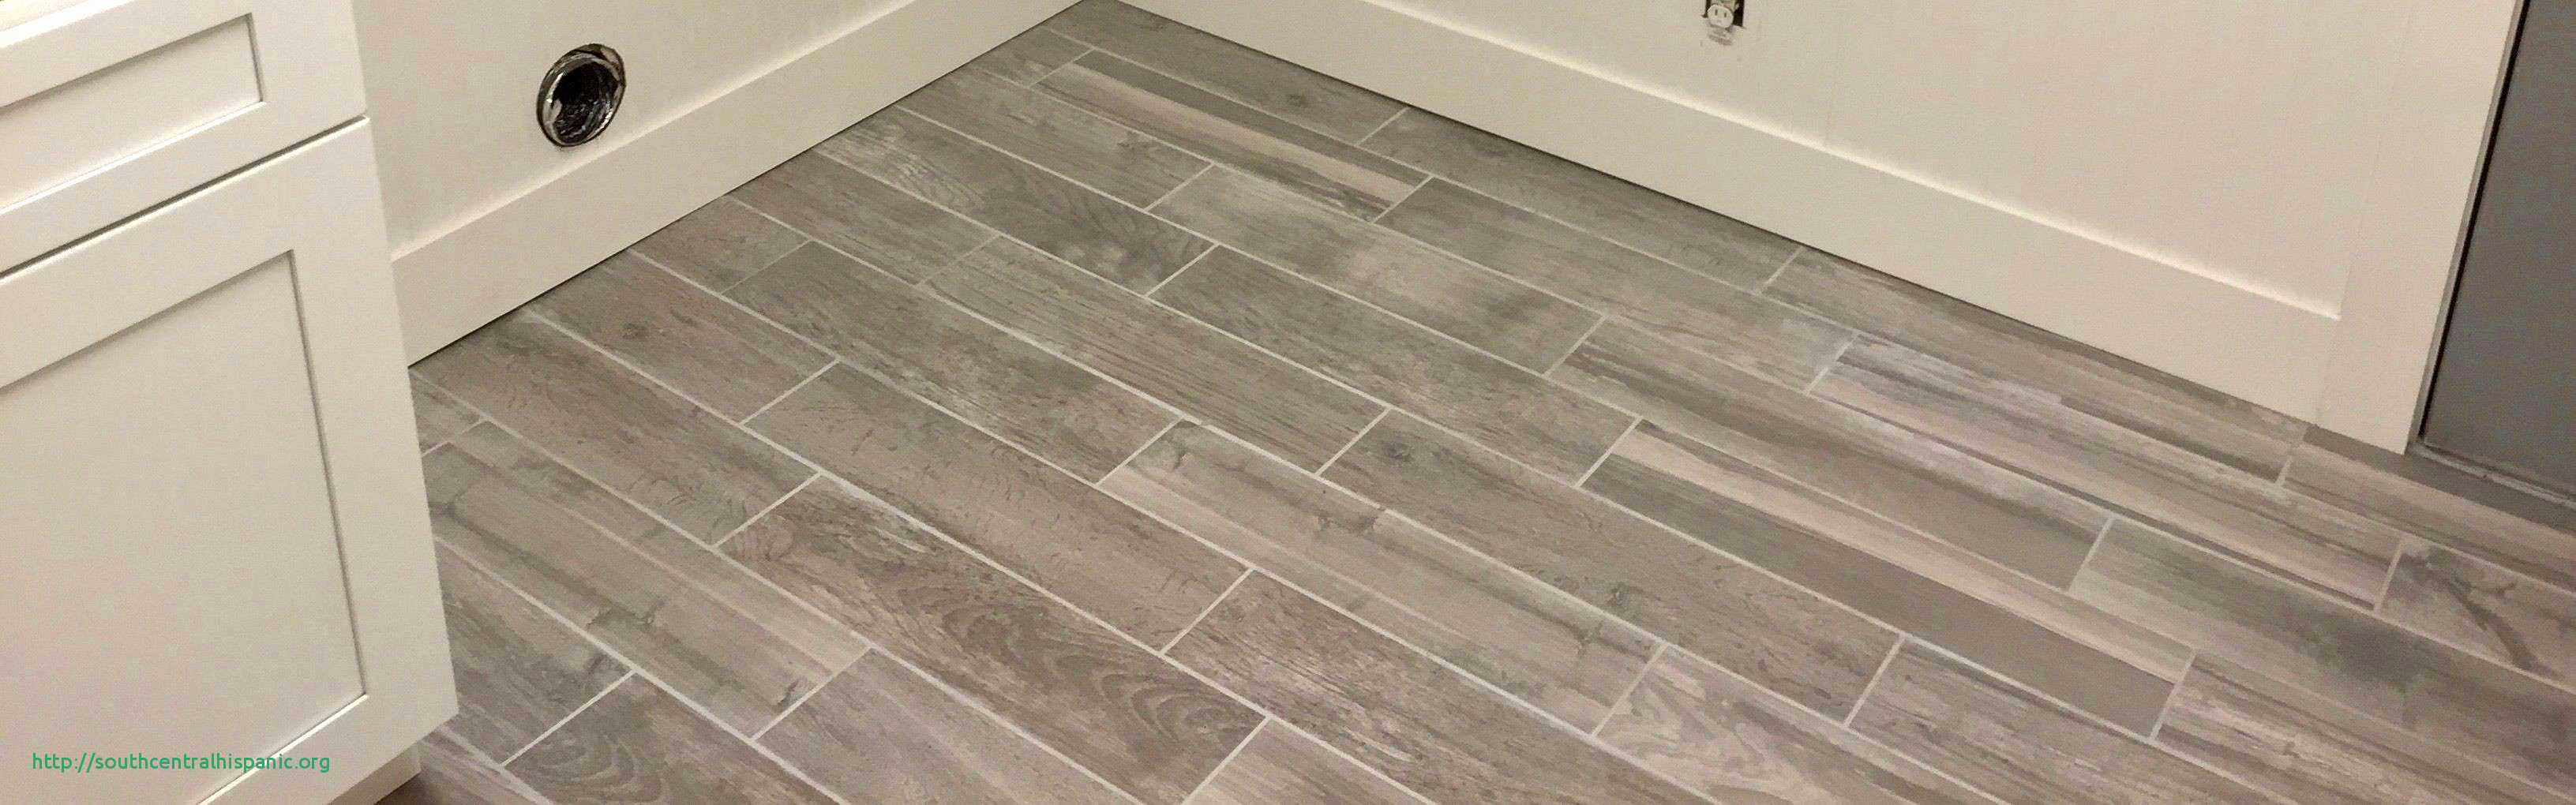 hardwood flooring for pets of 21 charmant how much does it cost for hardwood floors ideas blog in how much would it cost to install wood floors unique bathroom tiling ideas best h sink